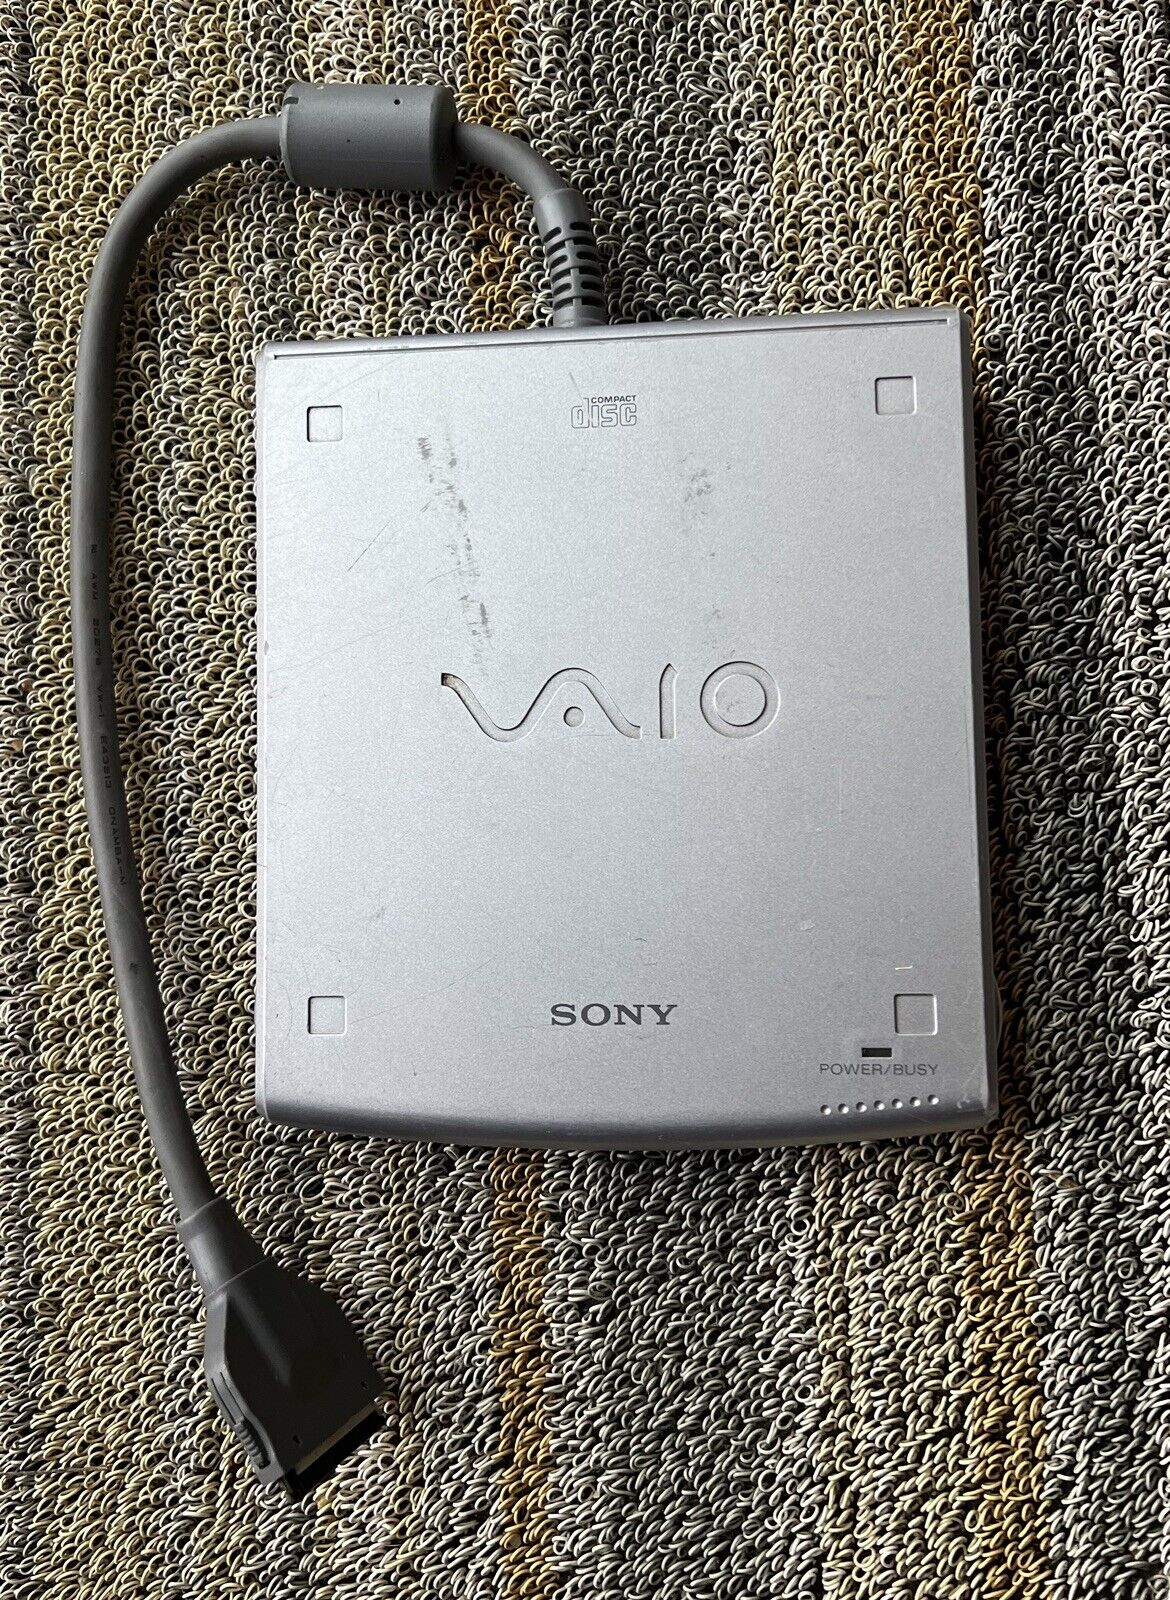 SONY VAIO PCGA-CD5 External CD-ROM Drive Player - Used, Good Condition Untested